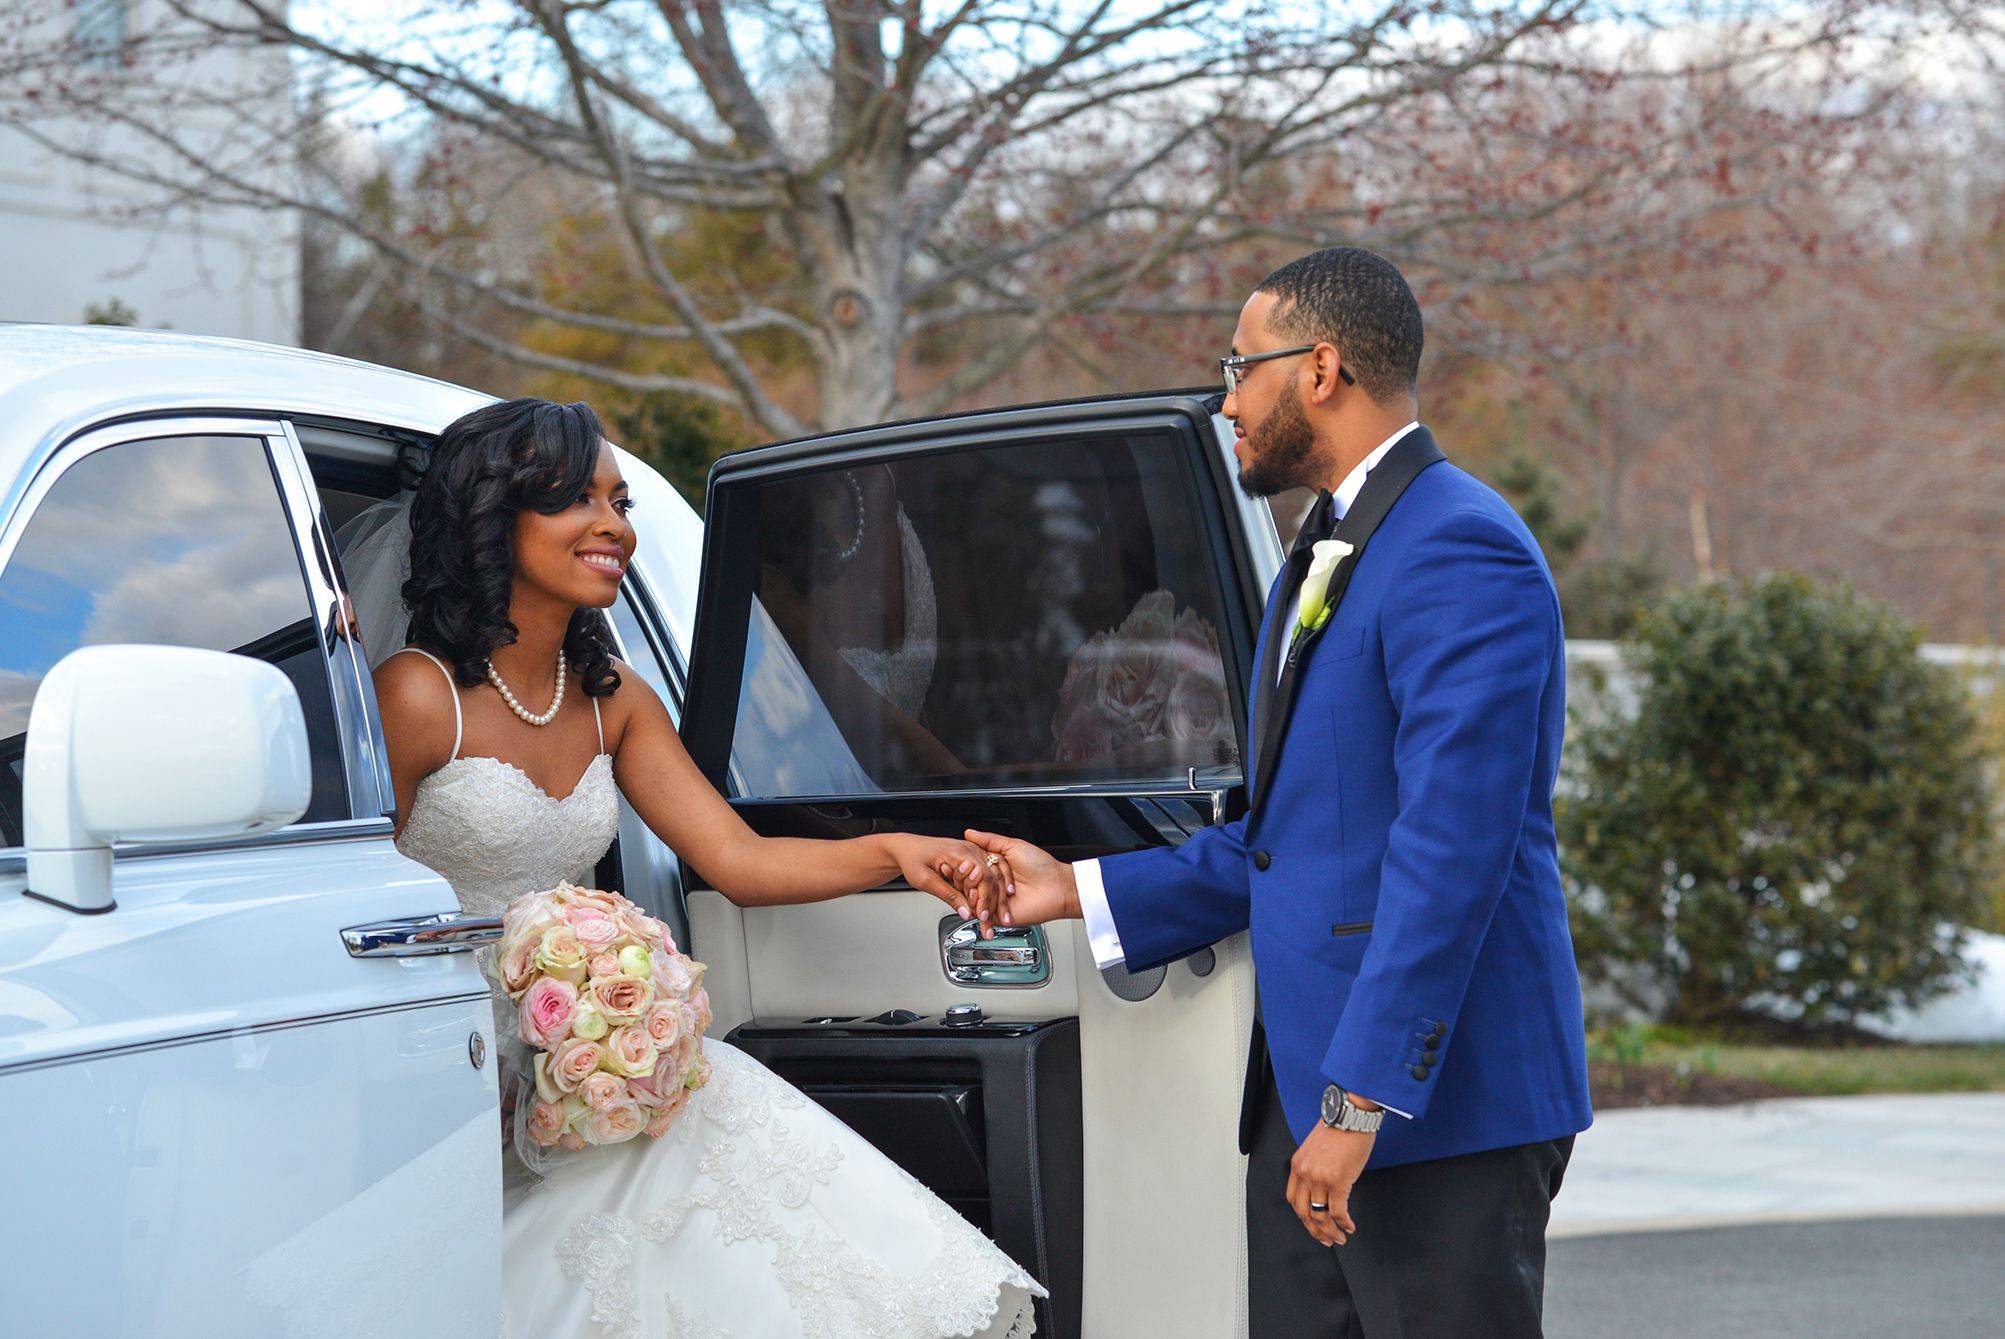 A bride and groom getting ready in a limo.